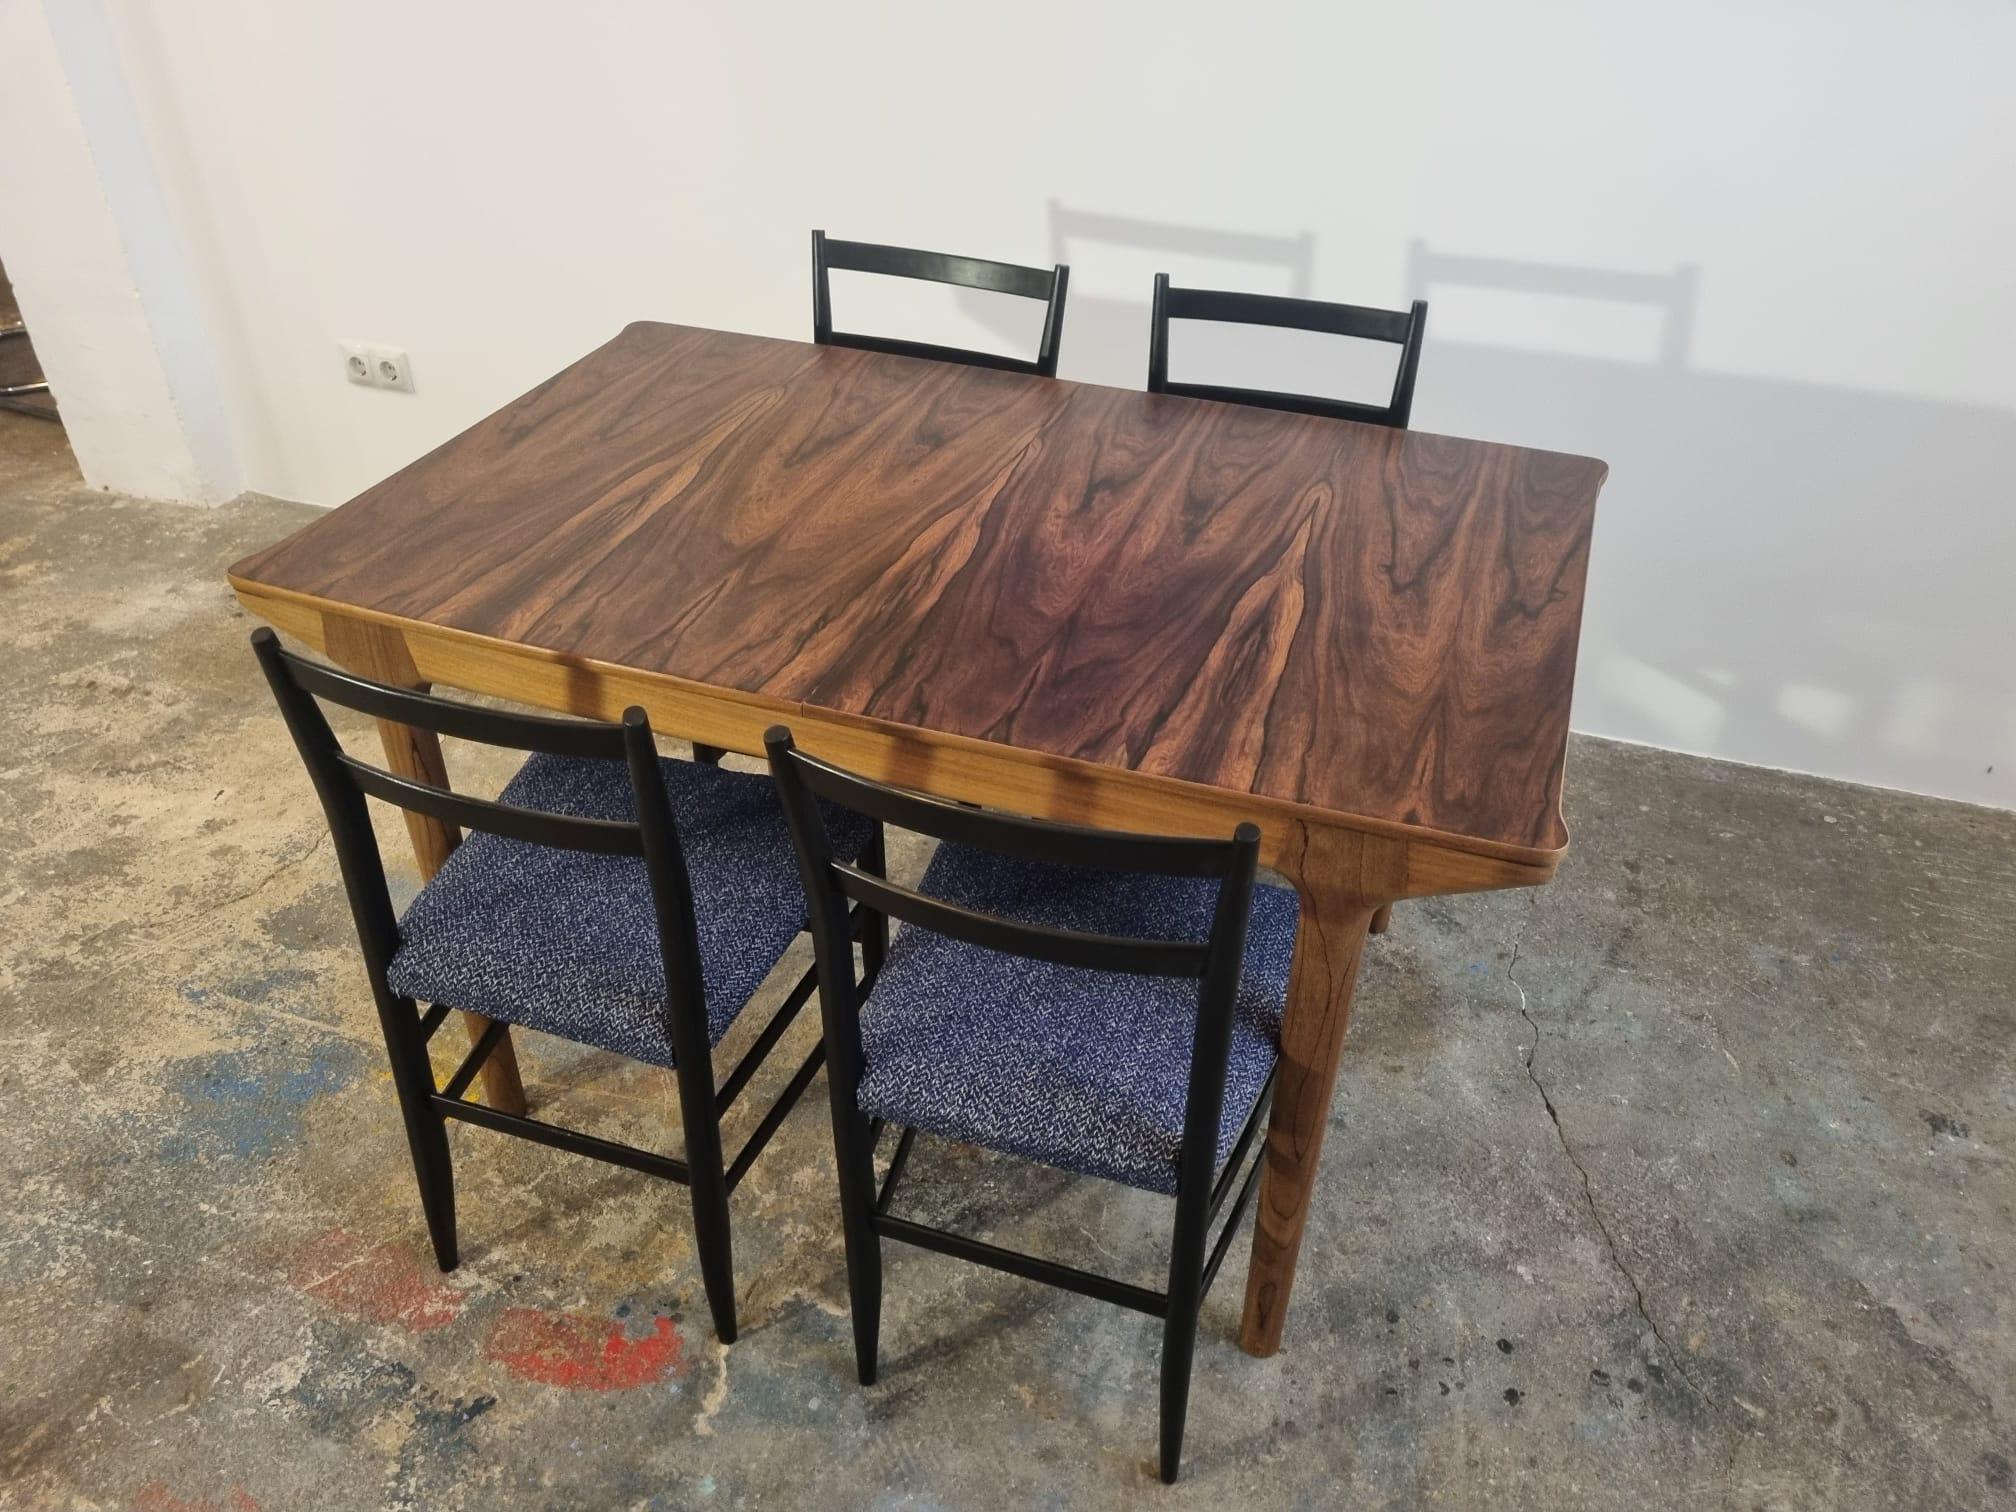 A stunning vintage extendable dining table in rosewood, this was made by A.H. McIntosh, Scotland and it dates from the 1960’s. 

We have had it stripped and re-polished, the condition is absolutely superb throughout. the color is beautiful and the